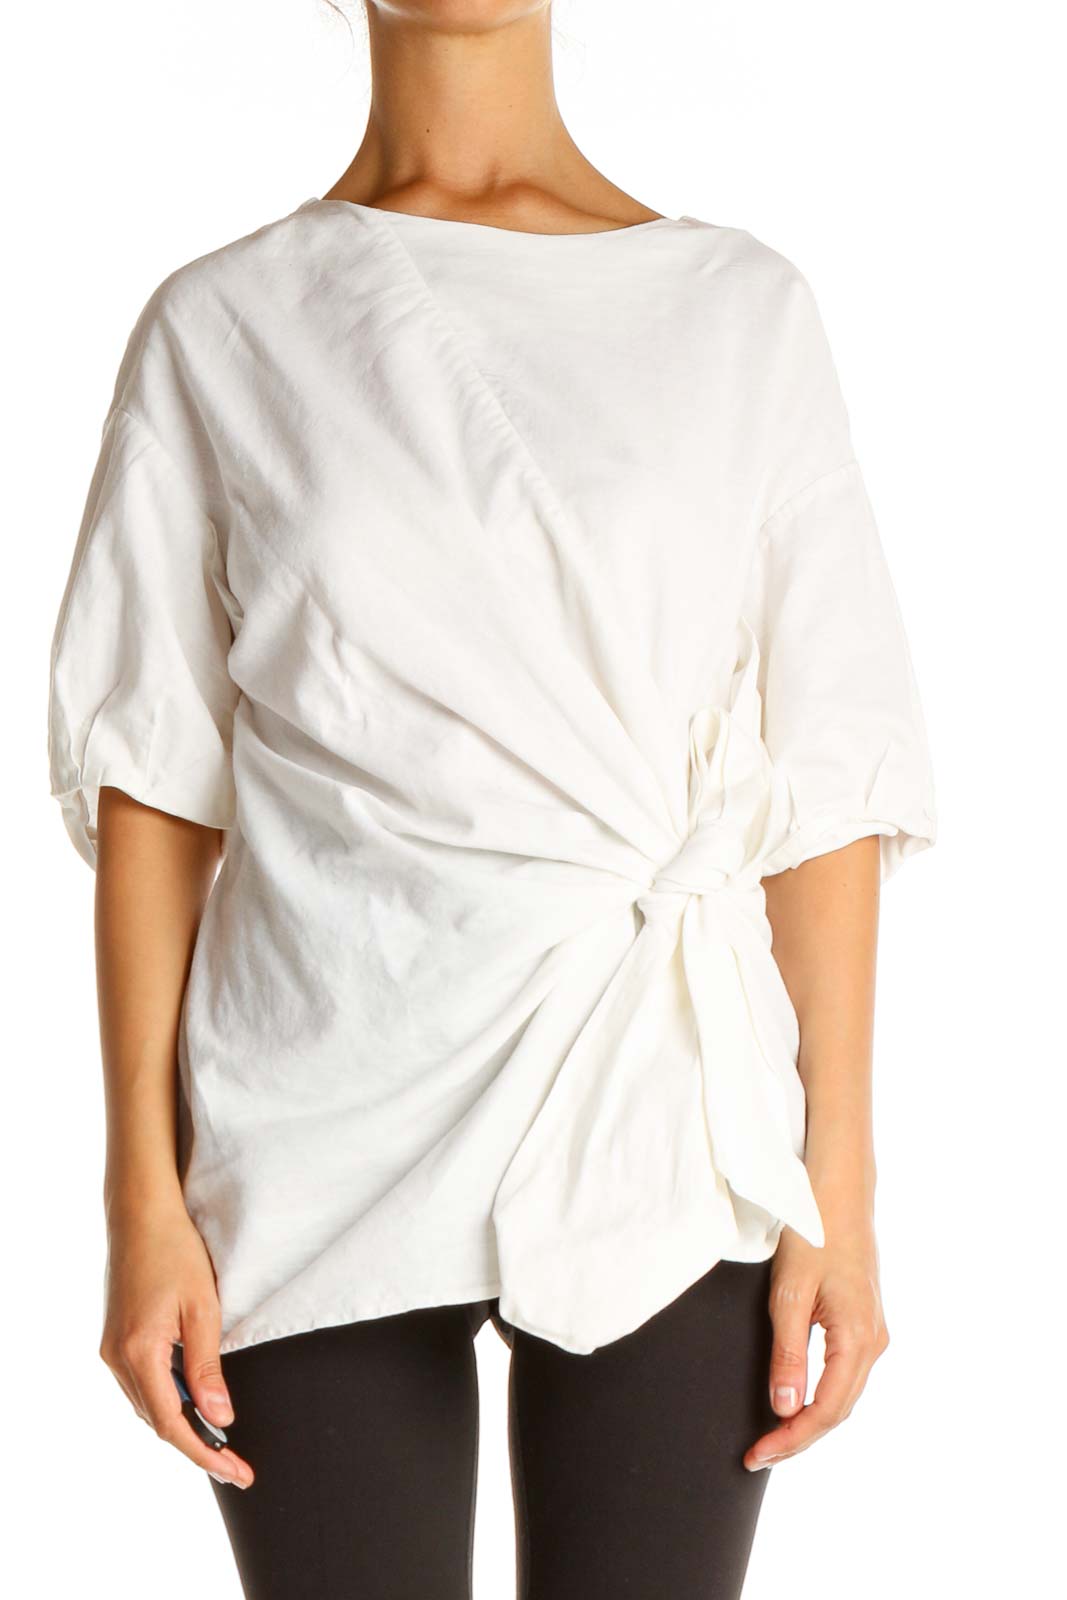 White Solid All Day Wear Blouse Front